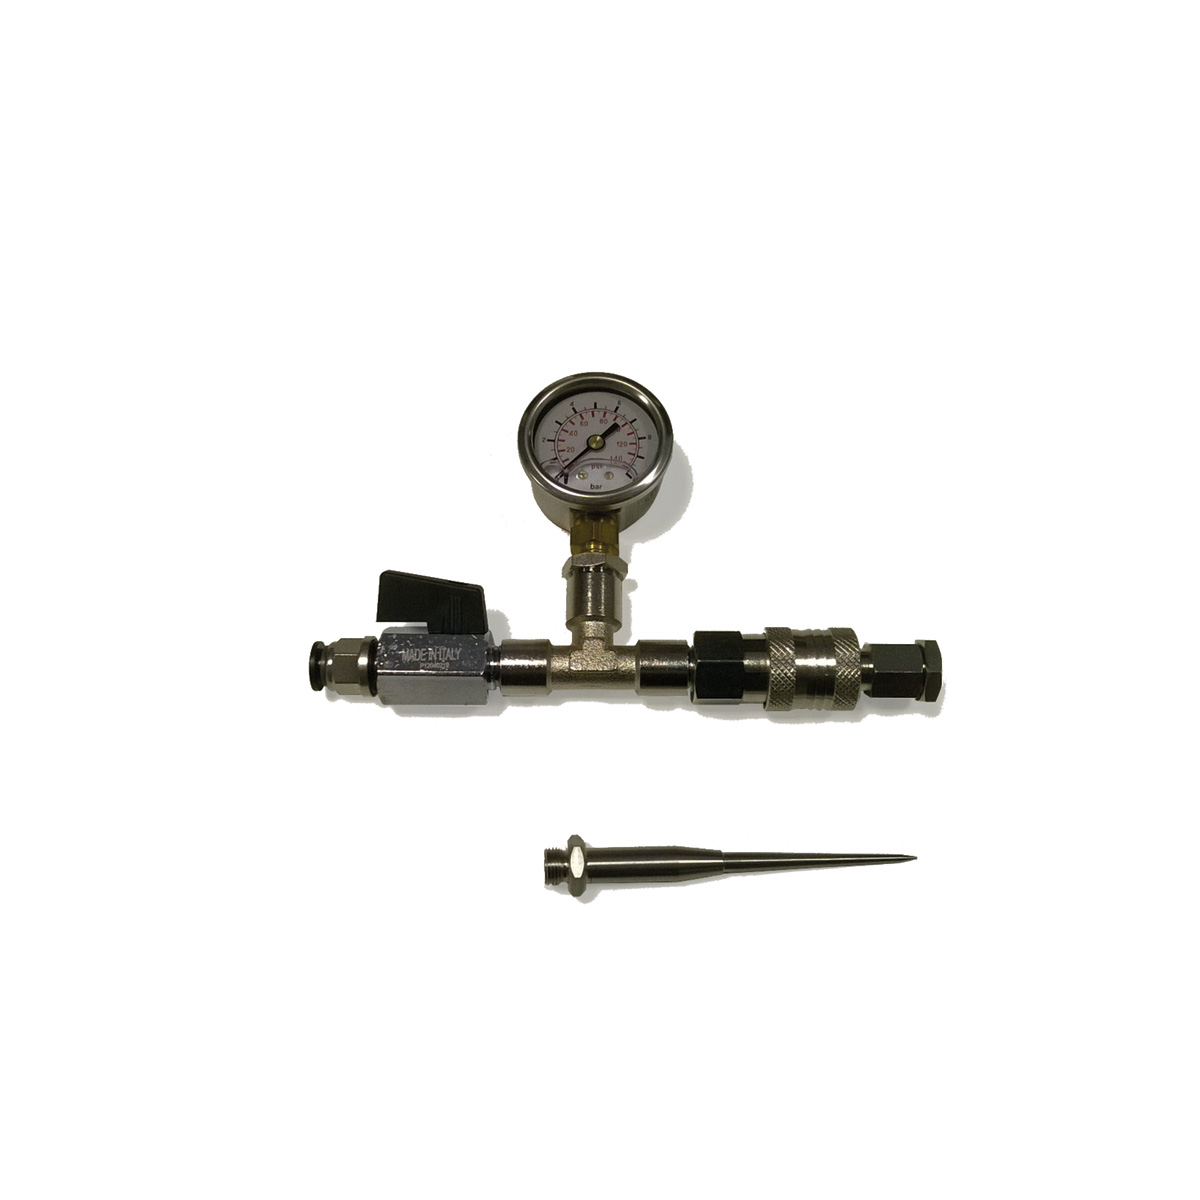 Certified pressure gauge assembly complete with faucets